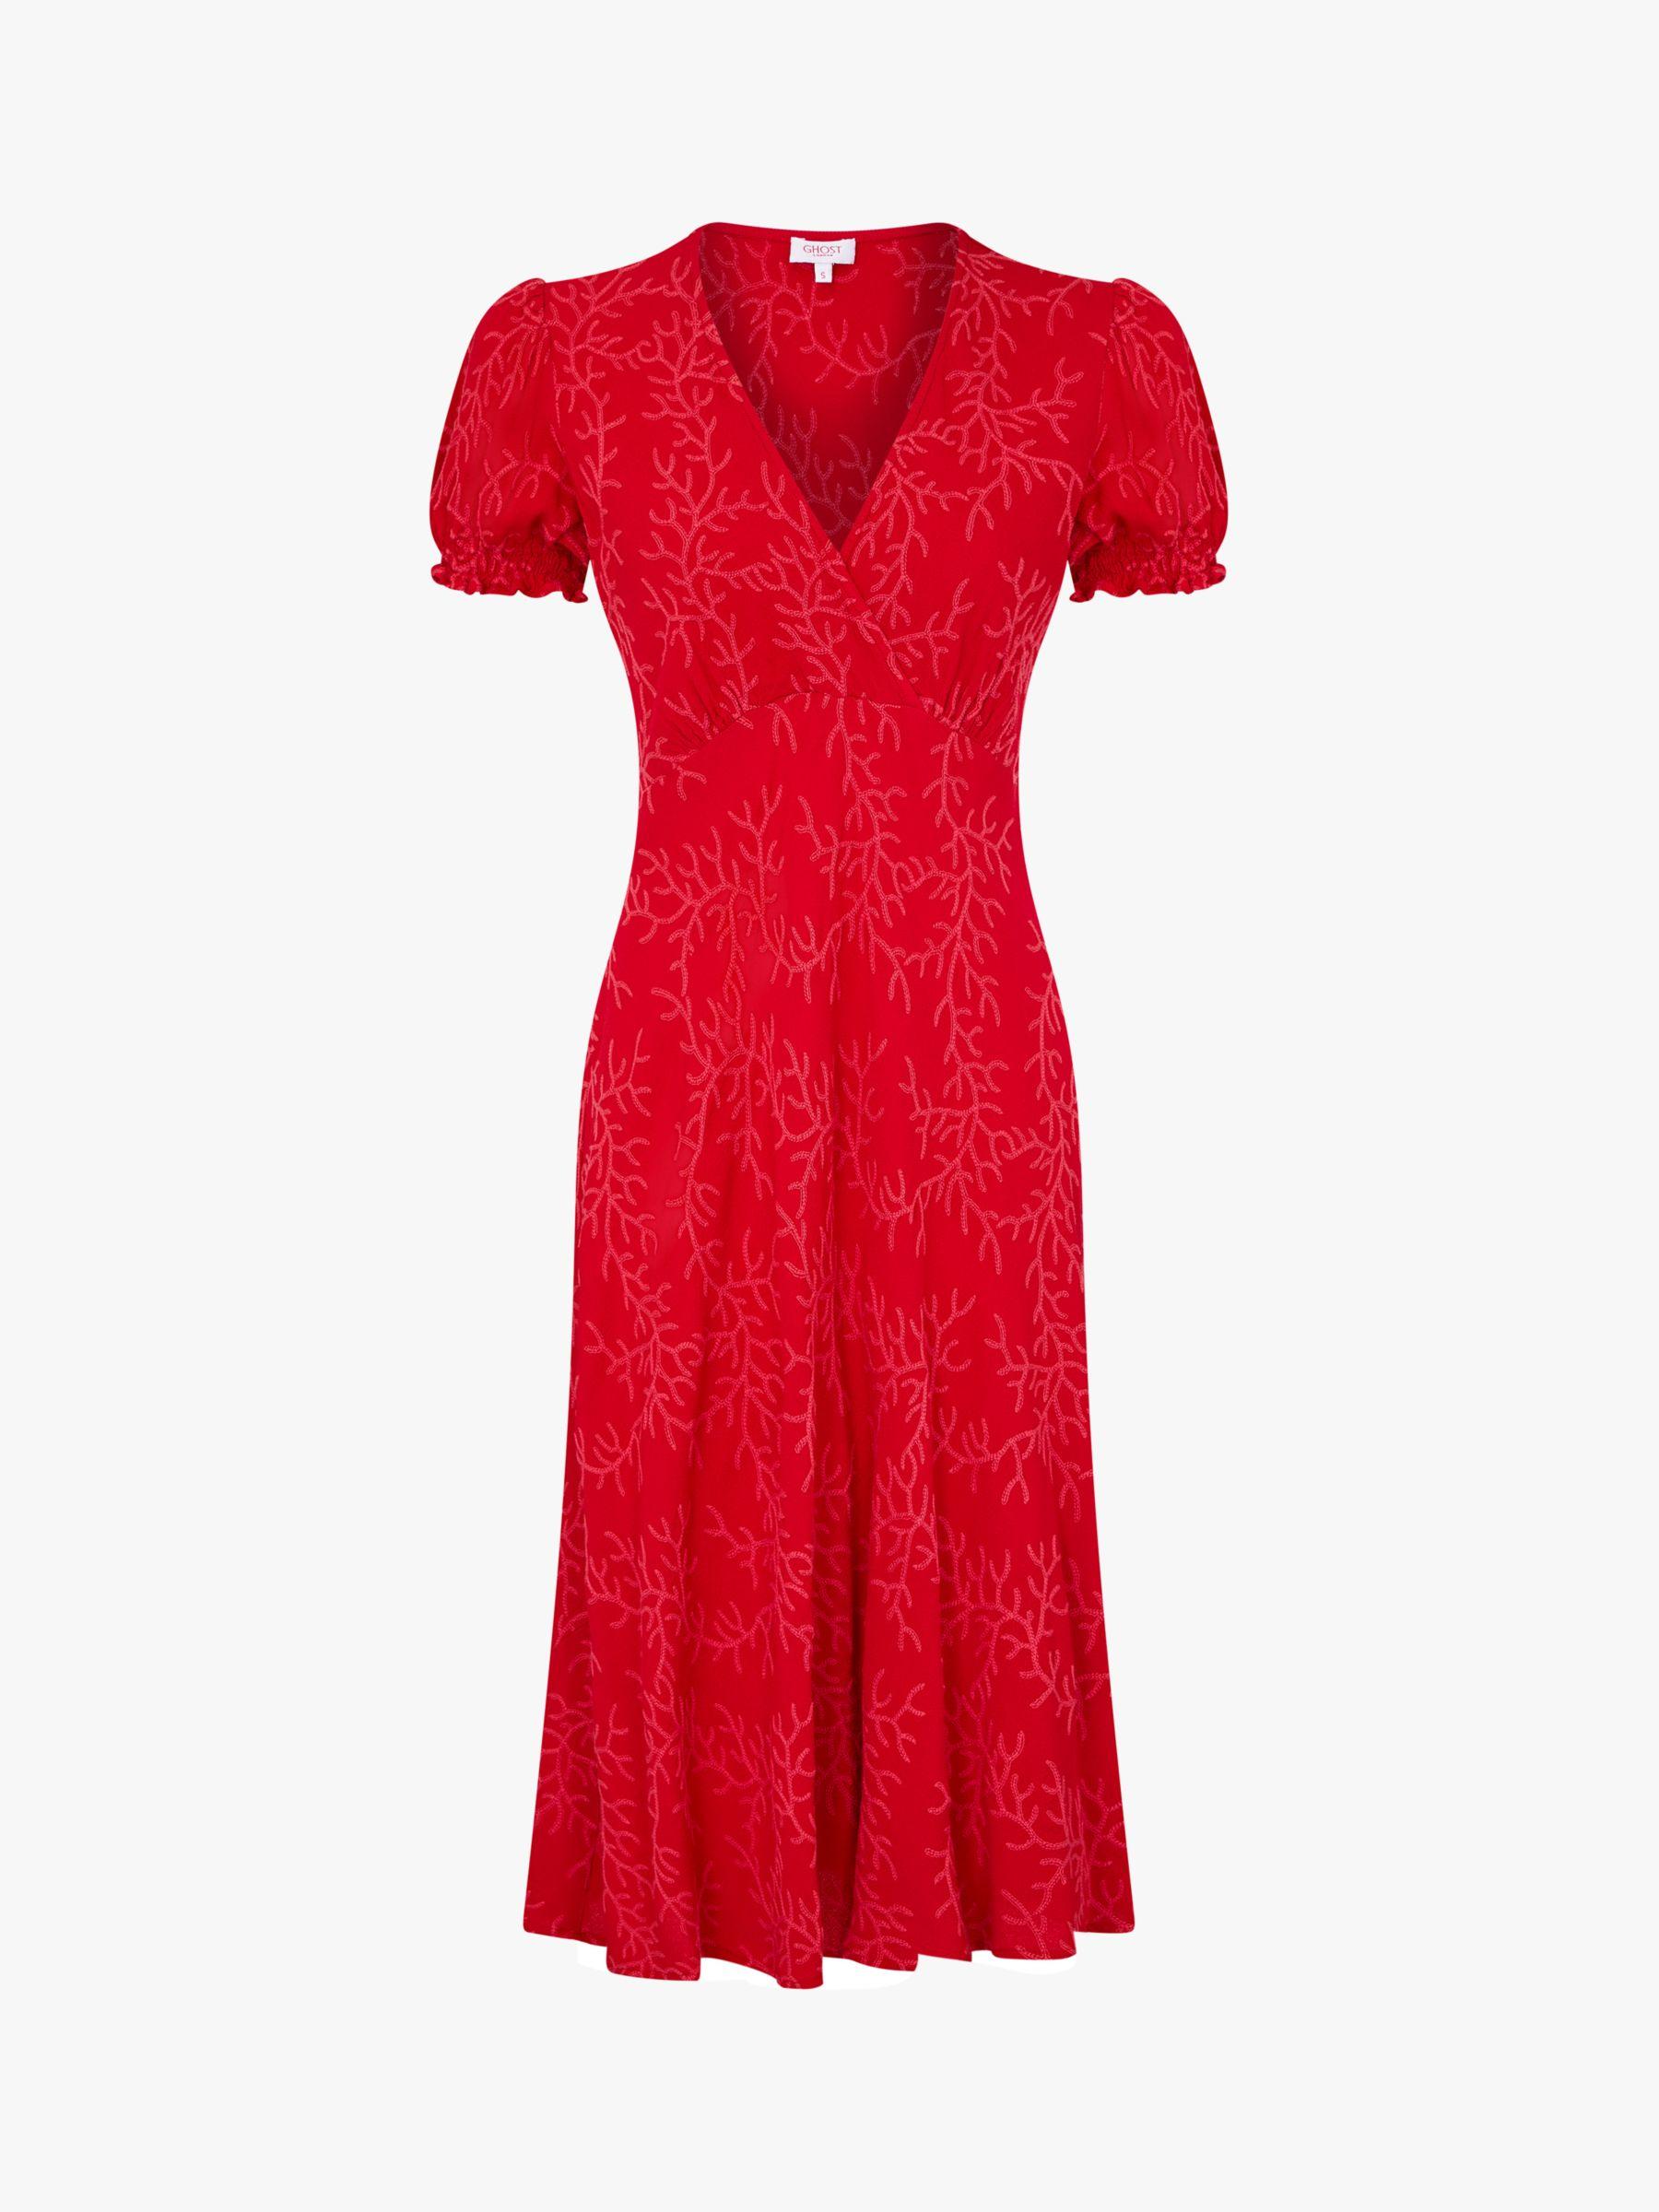 Ghost Synthetic Jemima Dress in Red - Lyst